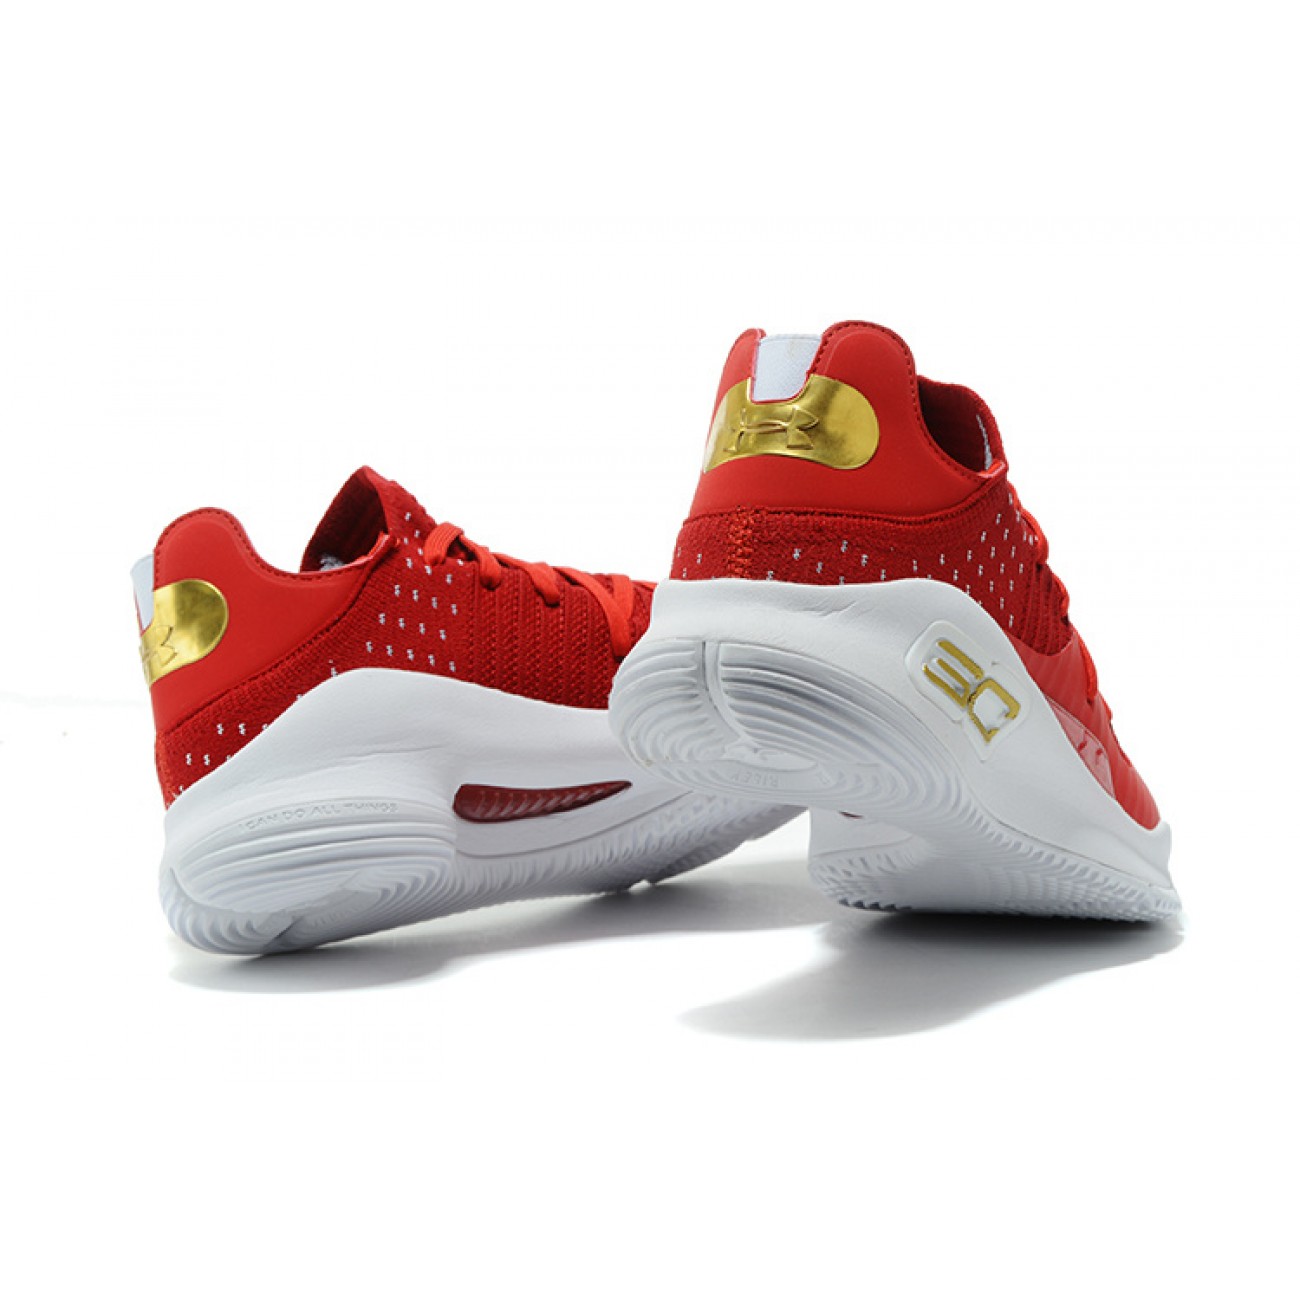 Under Armour UA Curry 4 Low Red/White